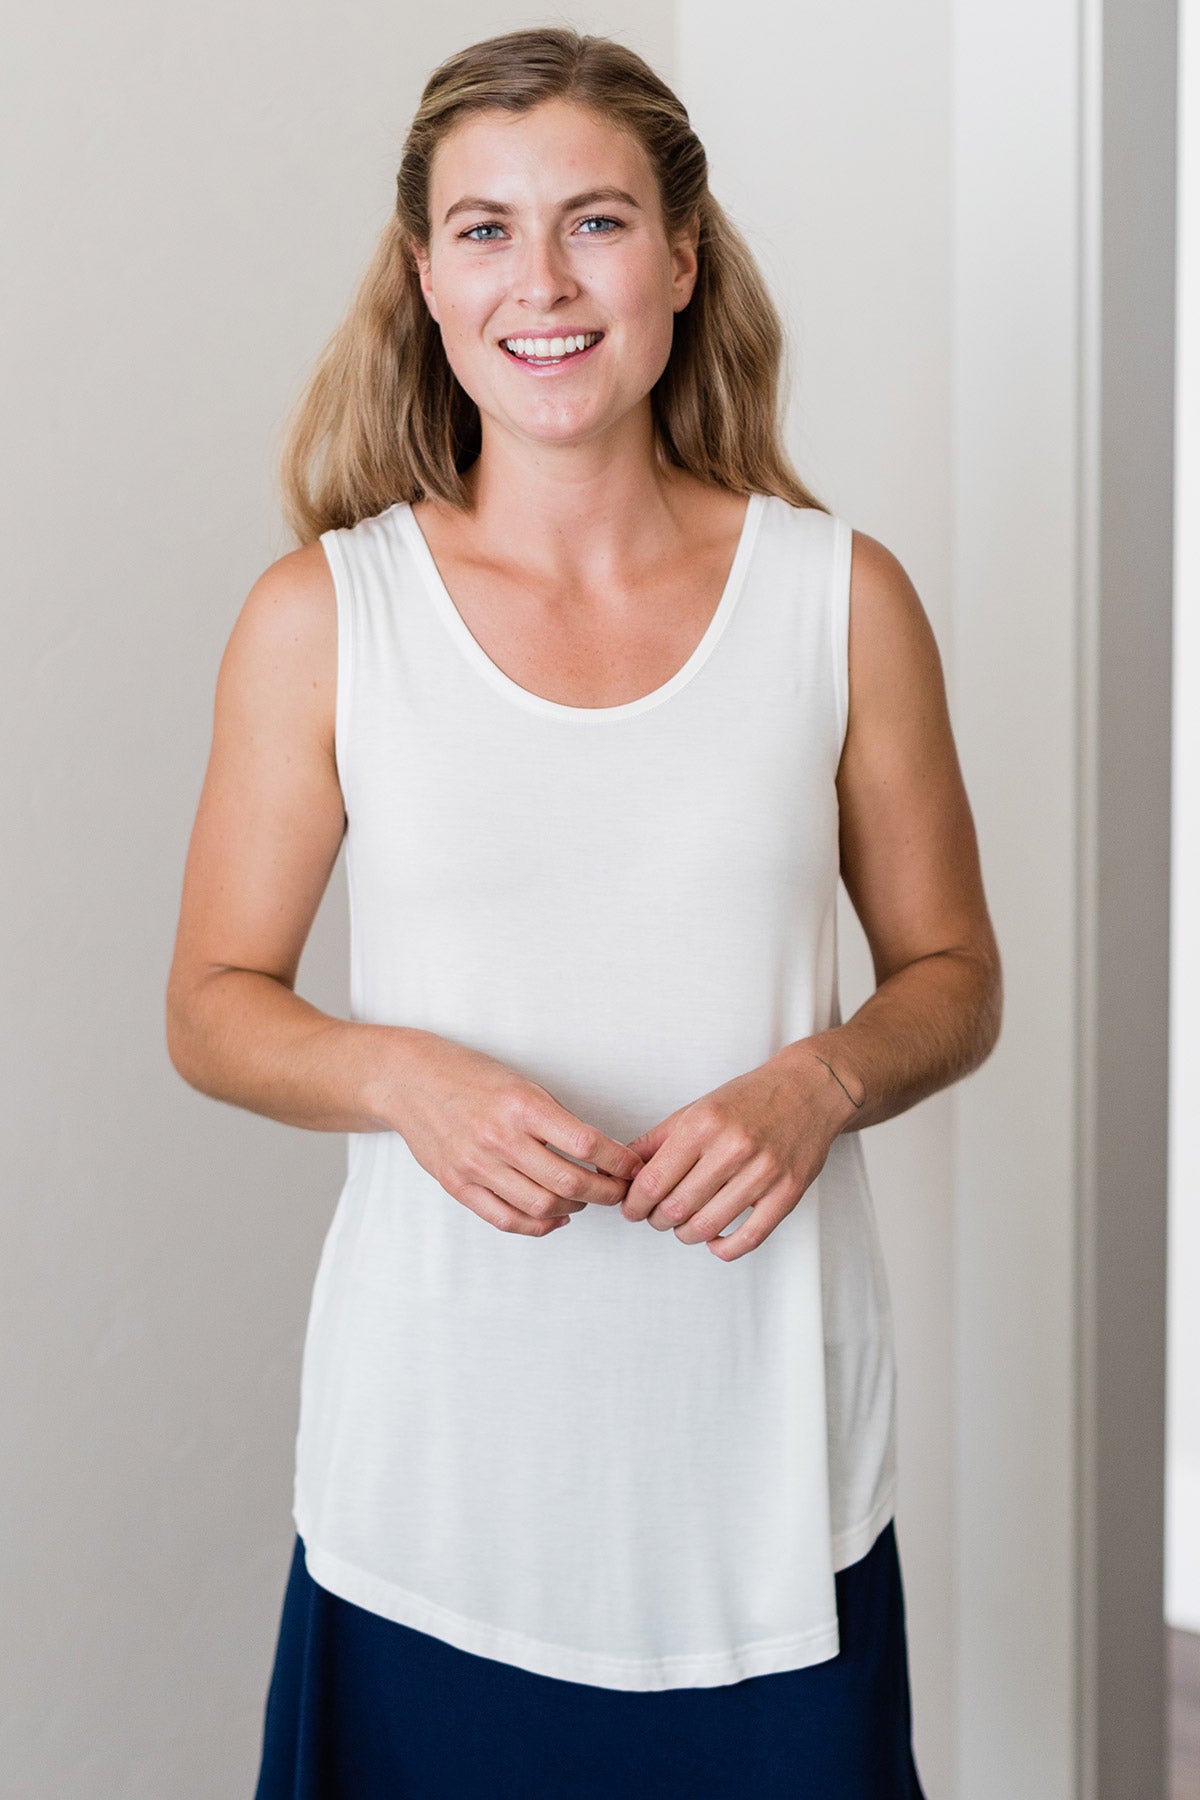 A woman standing and smiling with both hands held in front of her, wearing Yala Justine Bamboo Tunic Tank Top in Natural